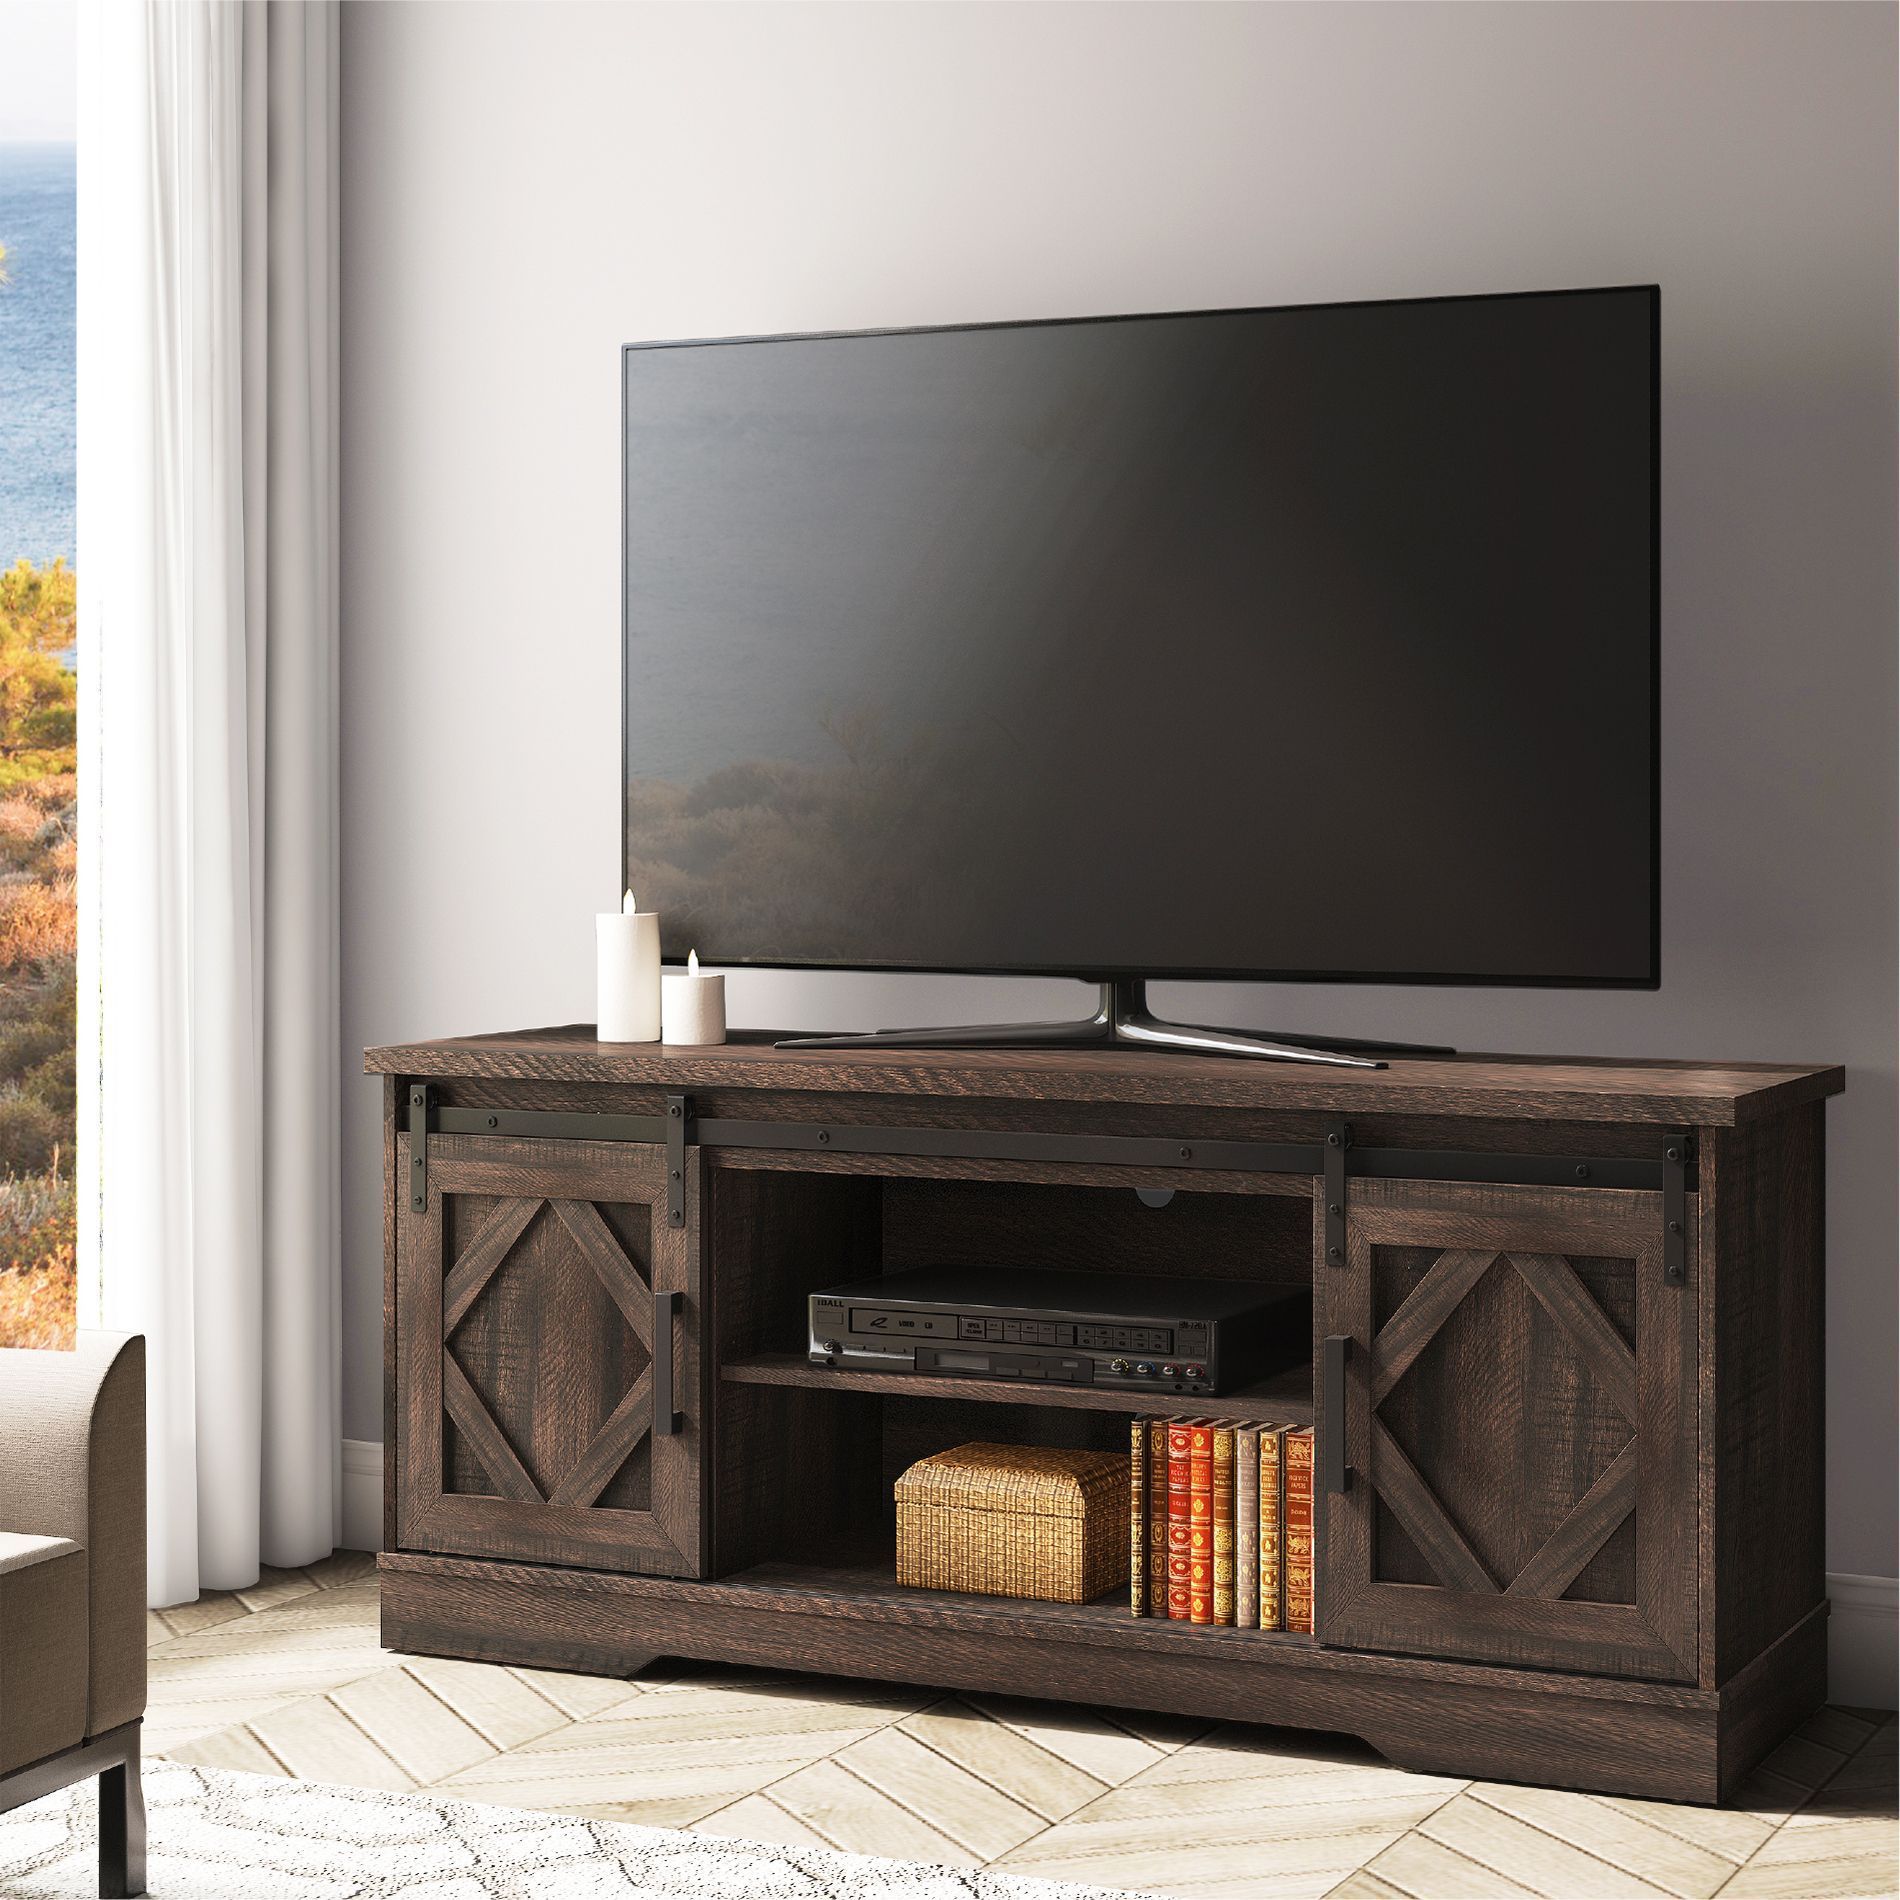 Fitueyes Sliding Barn Door Tv Stand For 70 Inch Flat With Regard To Tv Stands For 70 Flat Screen (View 4 of 15)